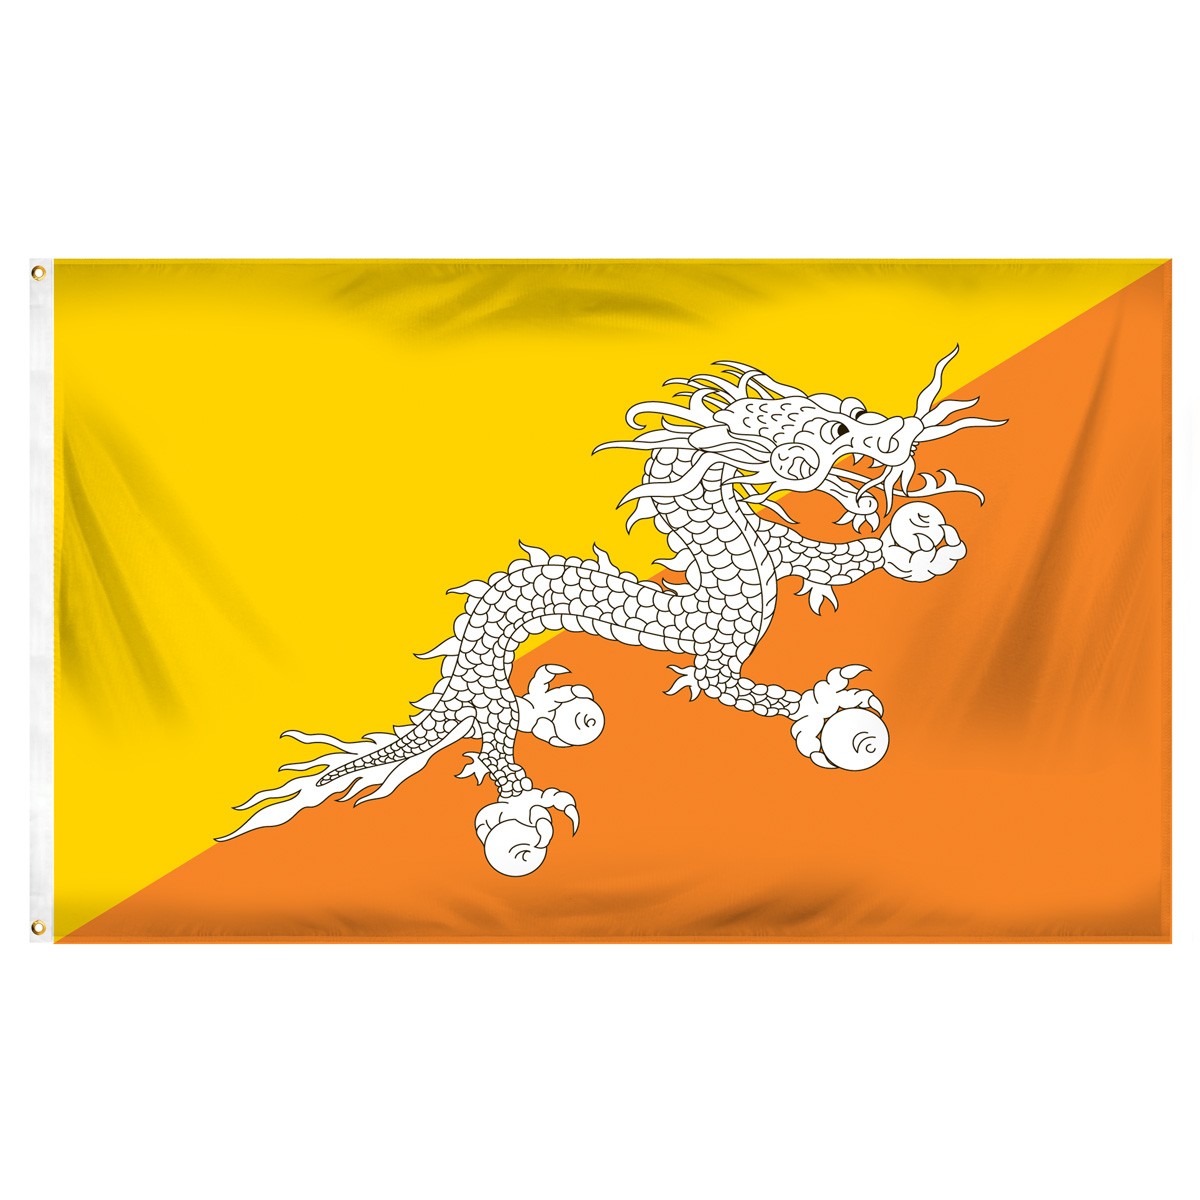 Bhutan Posters and Banners